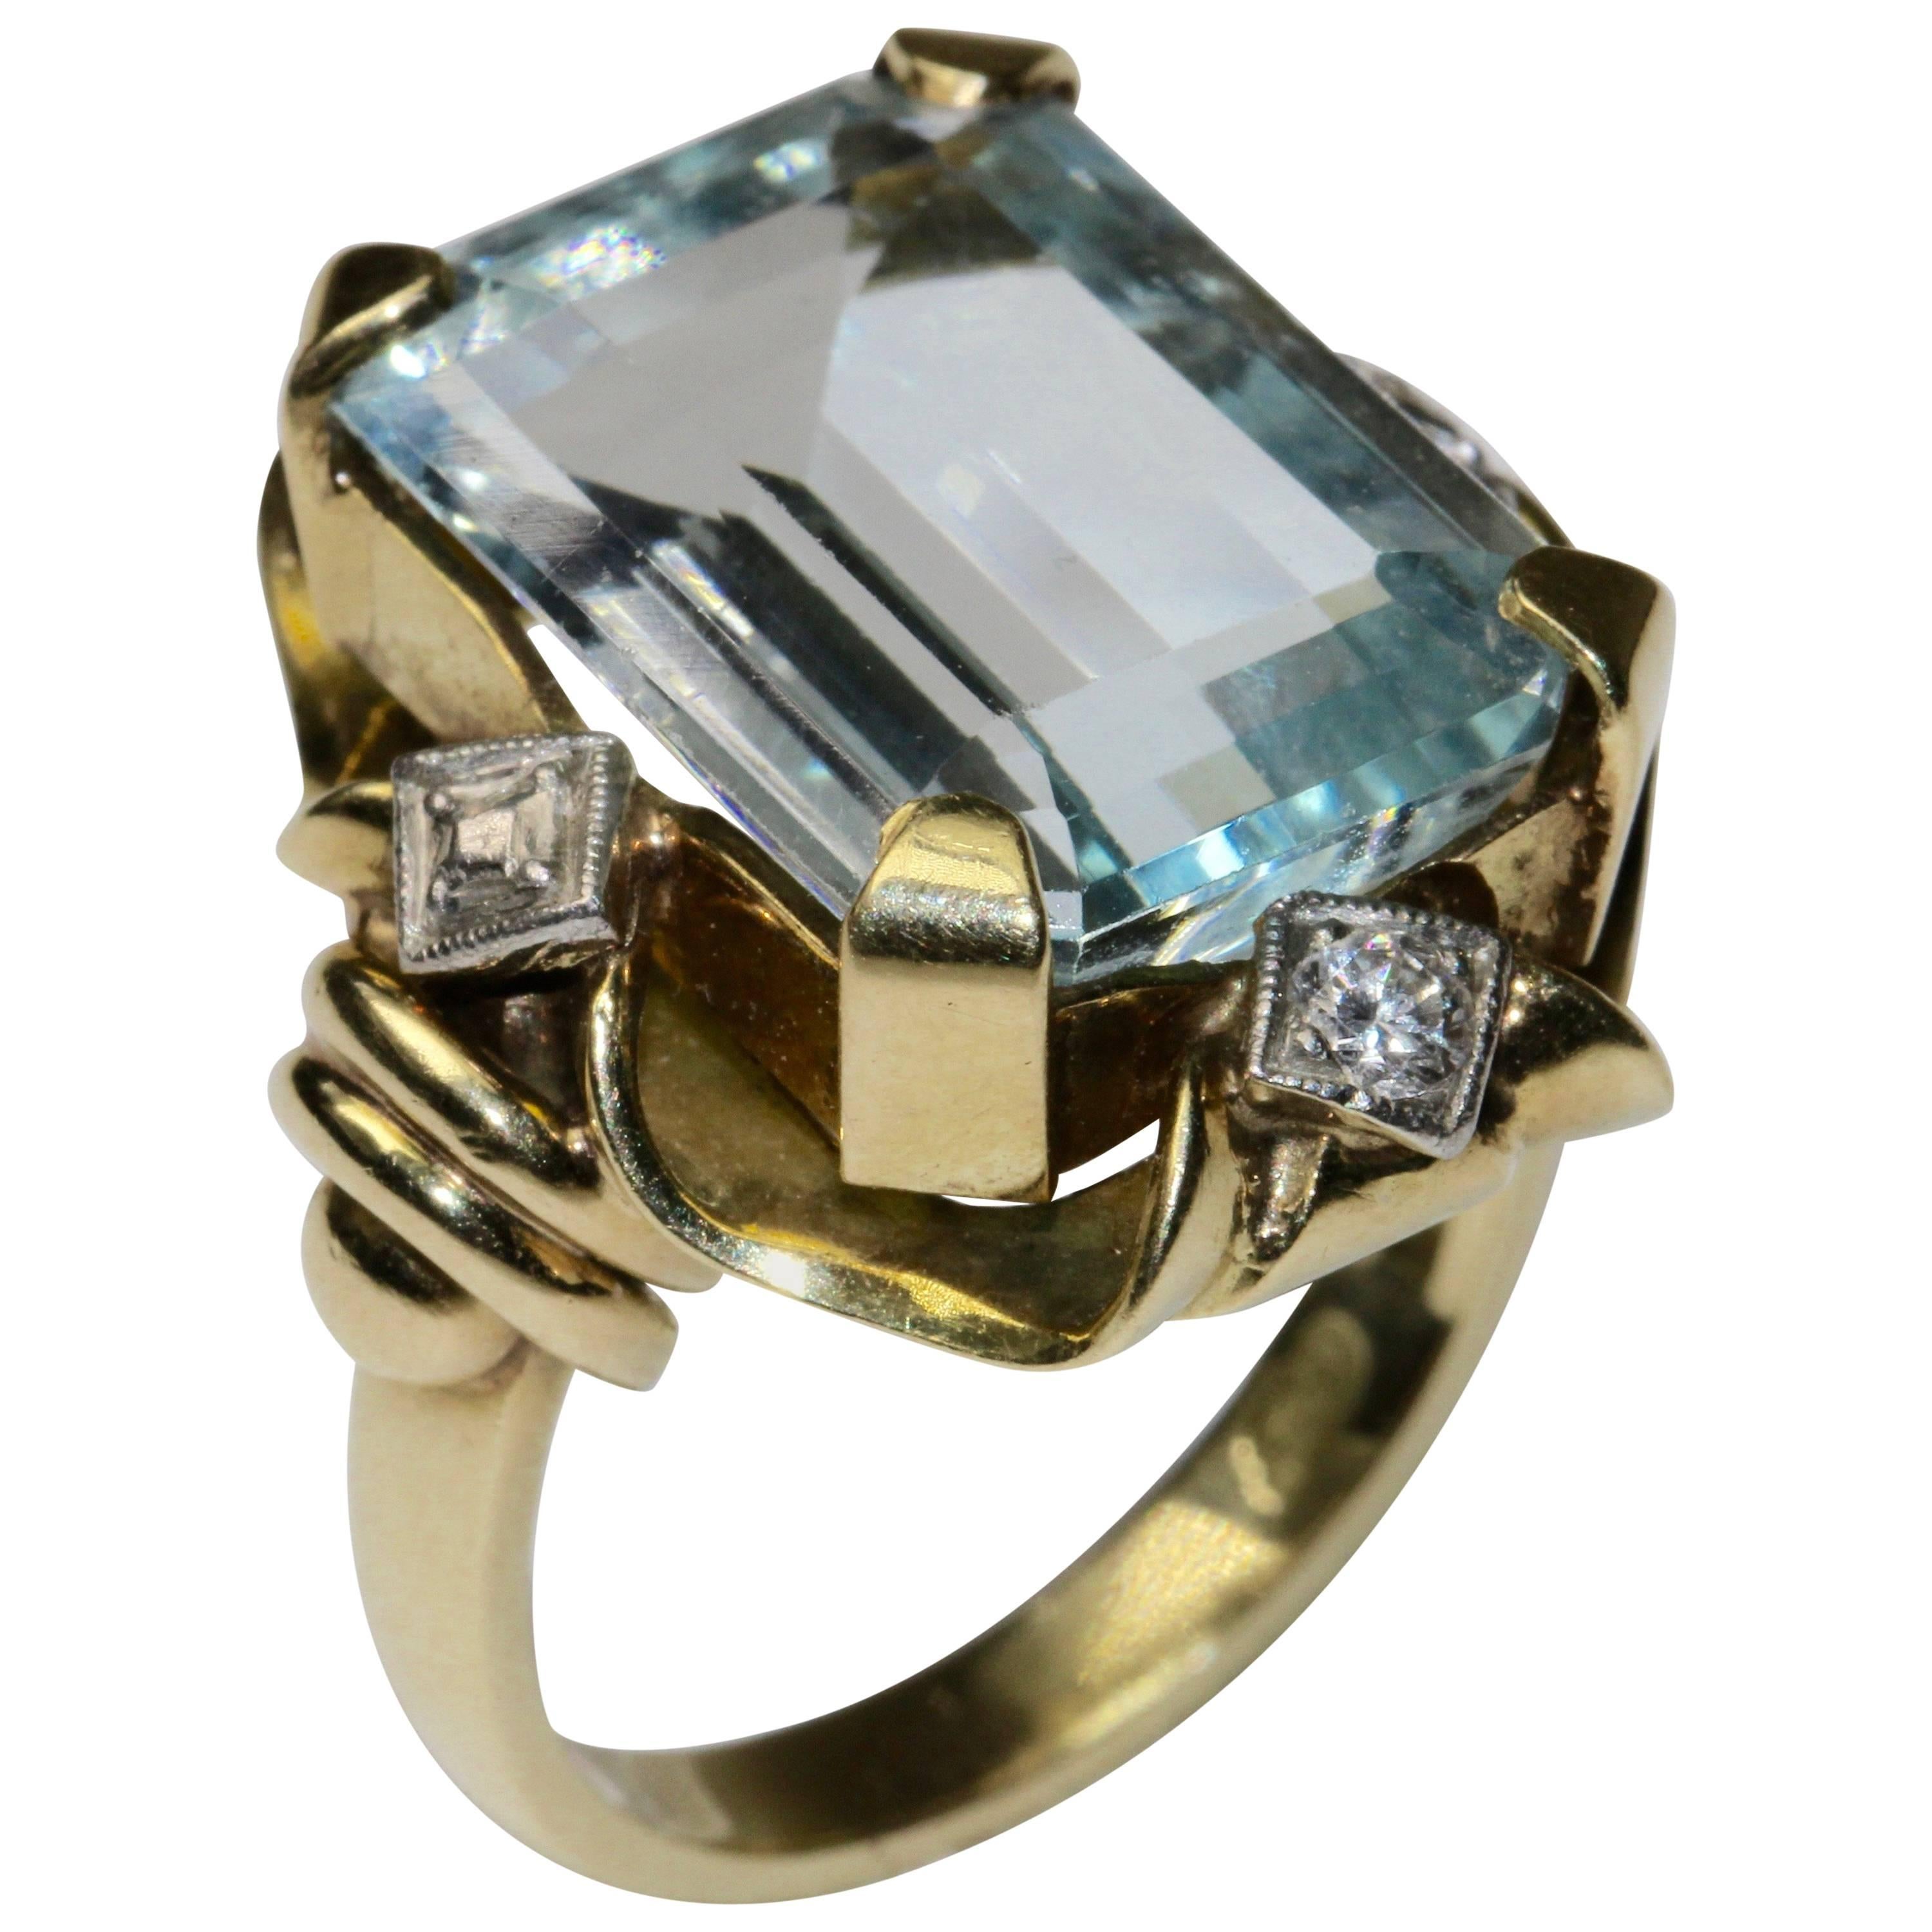 14K gold ring with large aquamarine and two brilliants